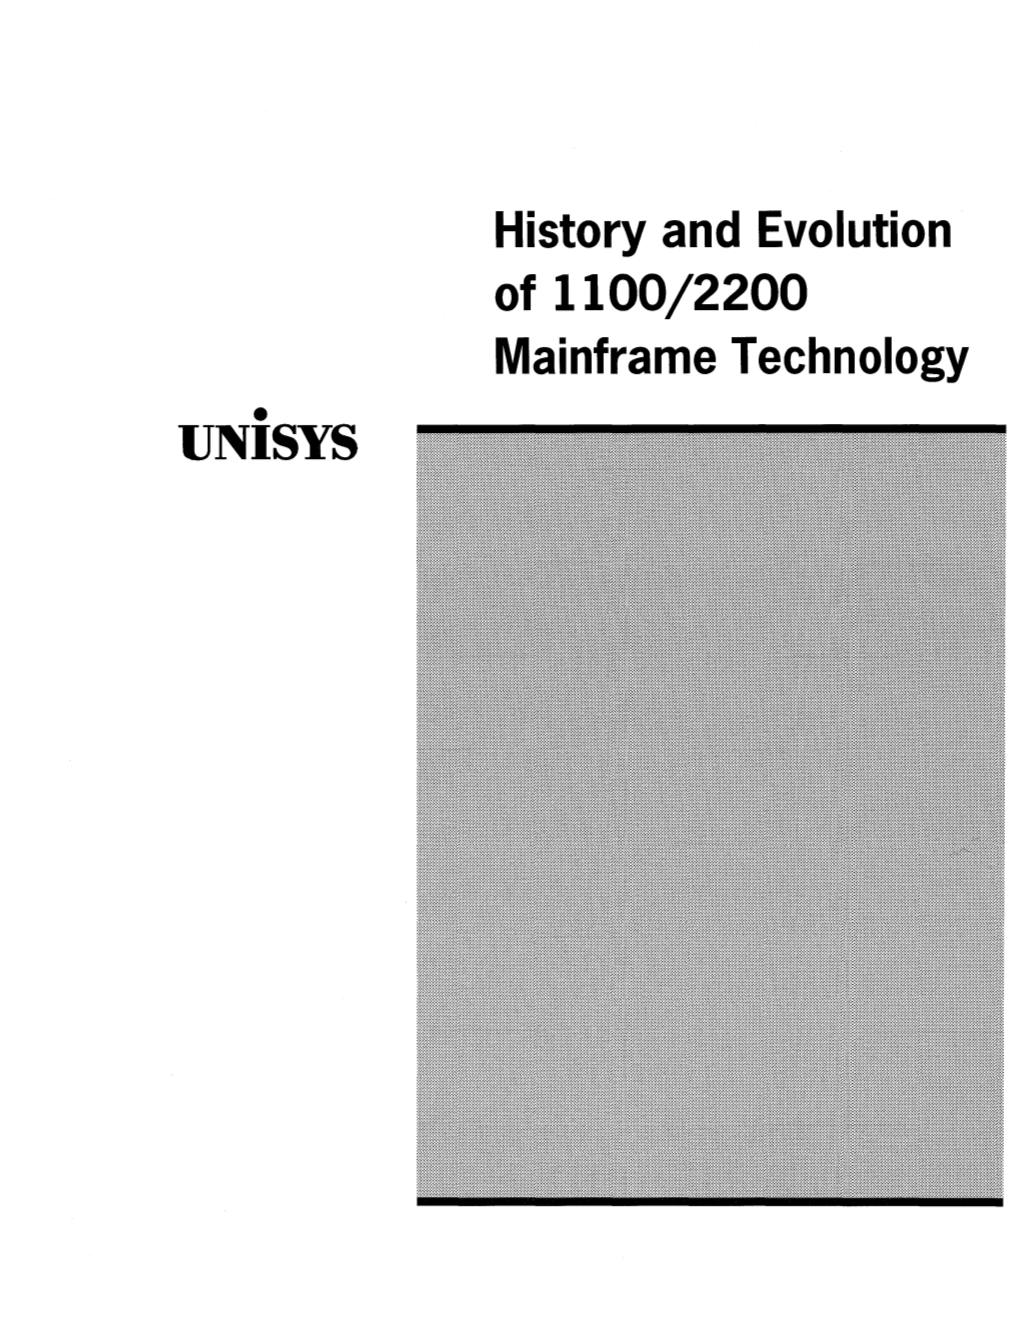 History and Evolution of 1100/2200 Mainframe Technology • UNISYS This Paper Was Prepared in Recognition of the 35Th Anniversary of USE Inc